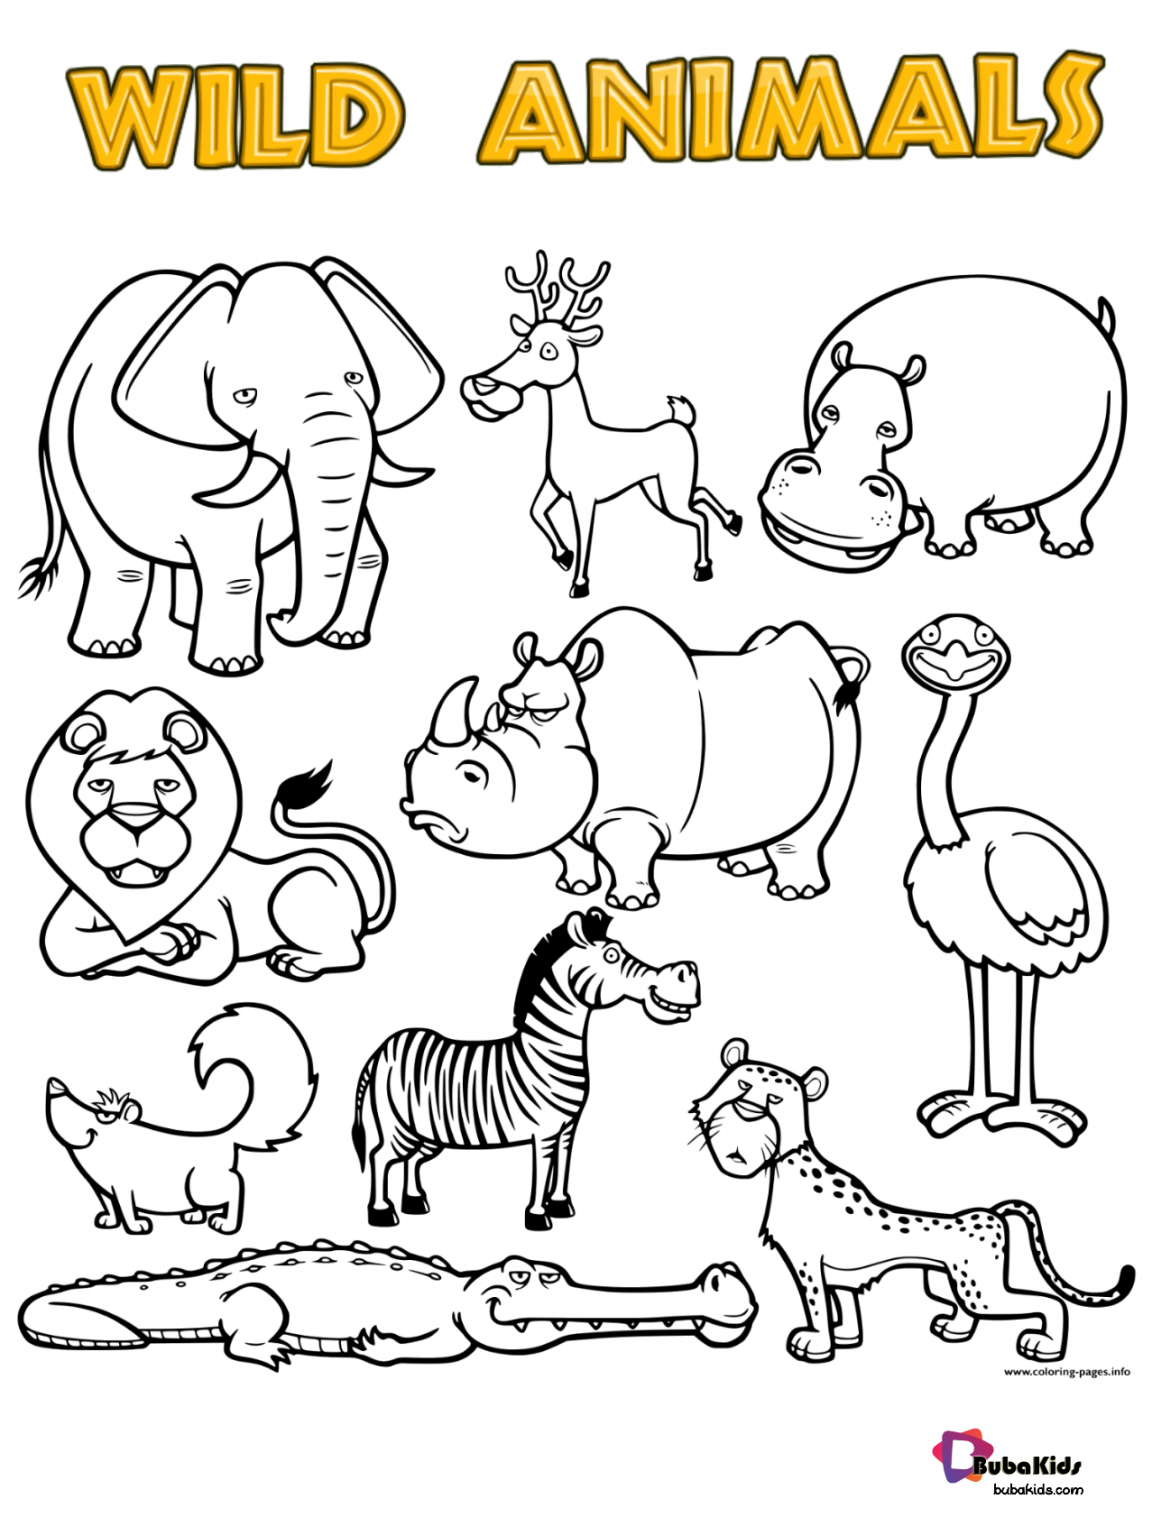 free-download-wild-animals-printable-coloring-page-bubakids